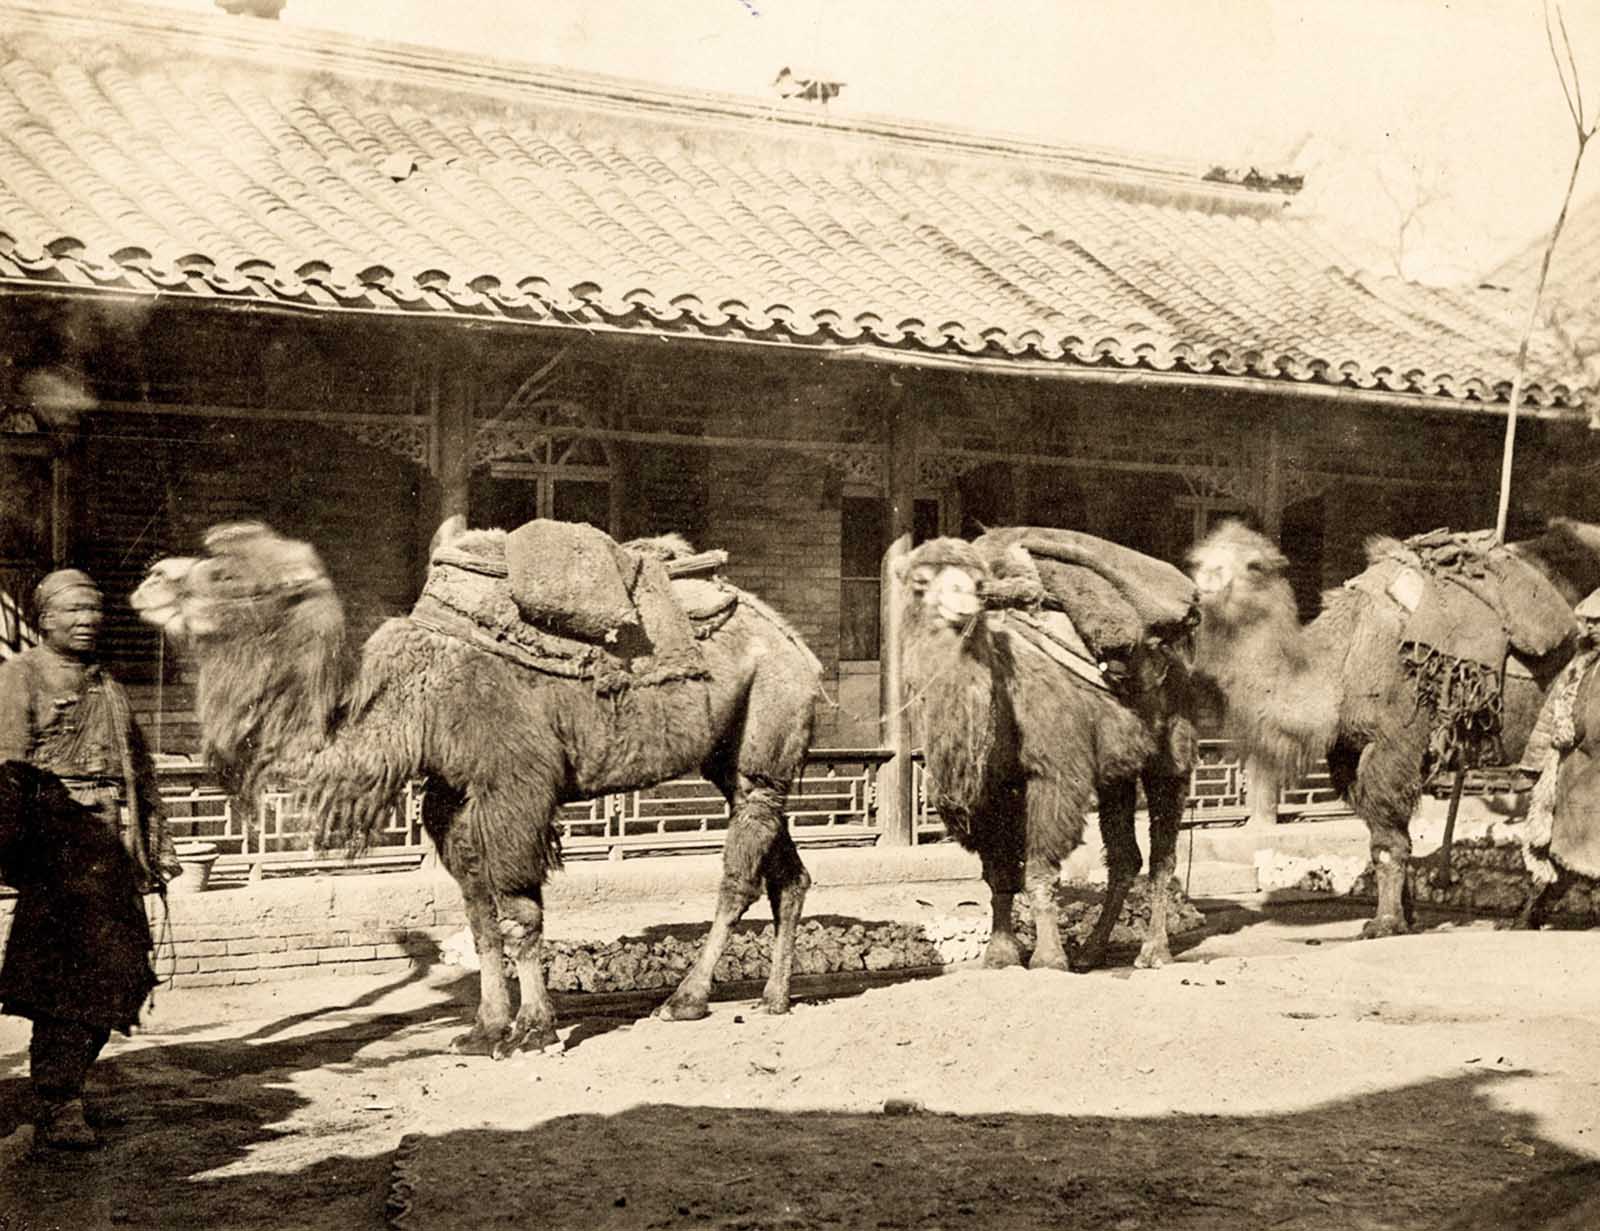 A view of 19th-century travelers and their camels on the Silk Road in China. The Bactrian camels, distinguished by their double humps, were used to 